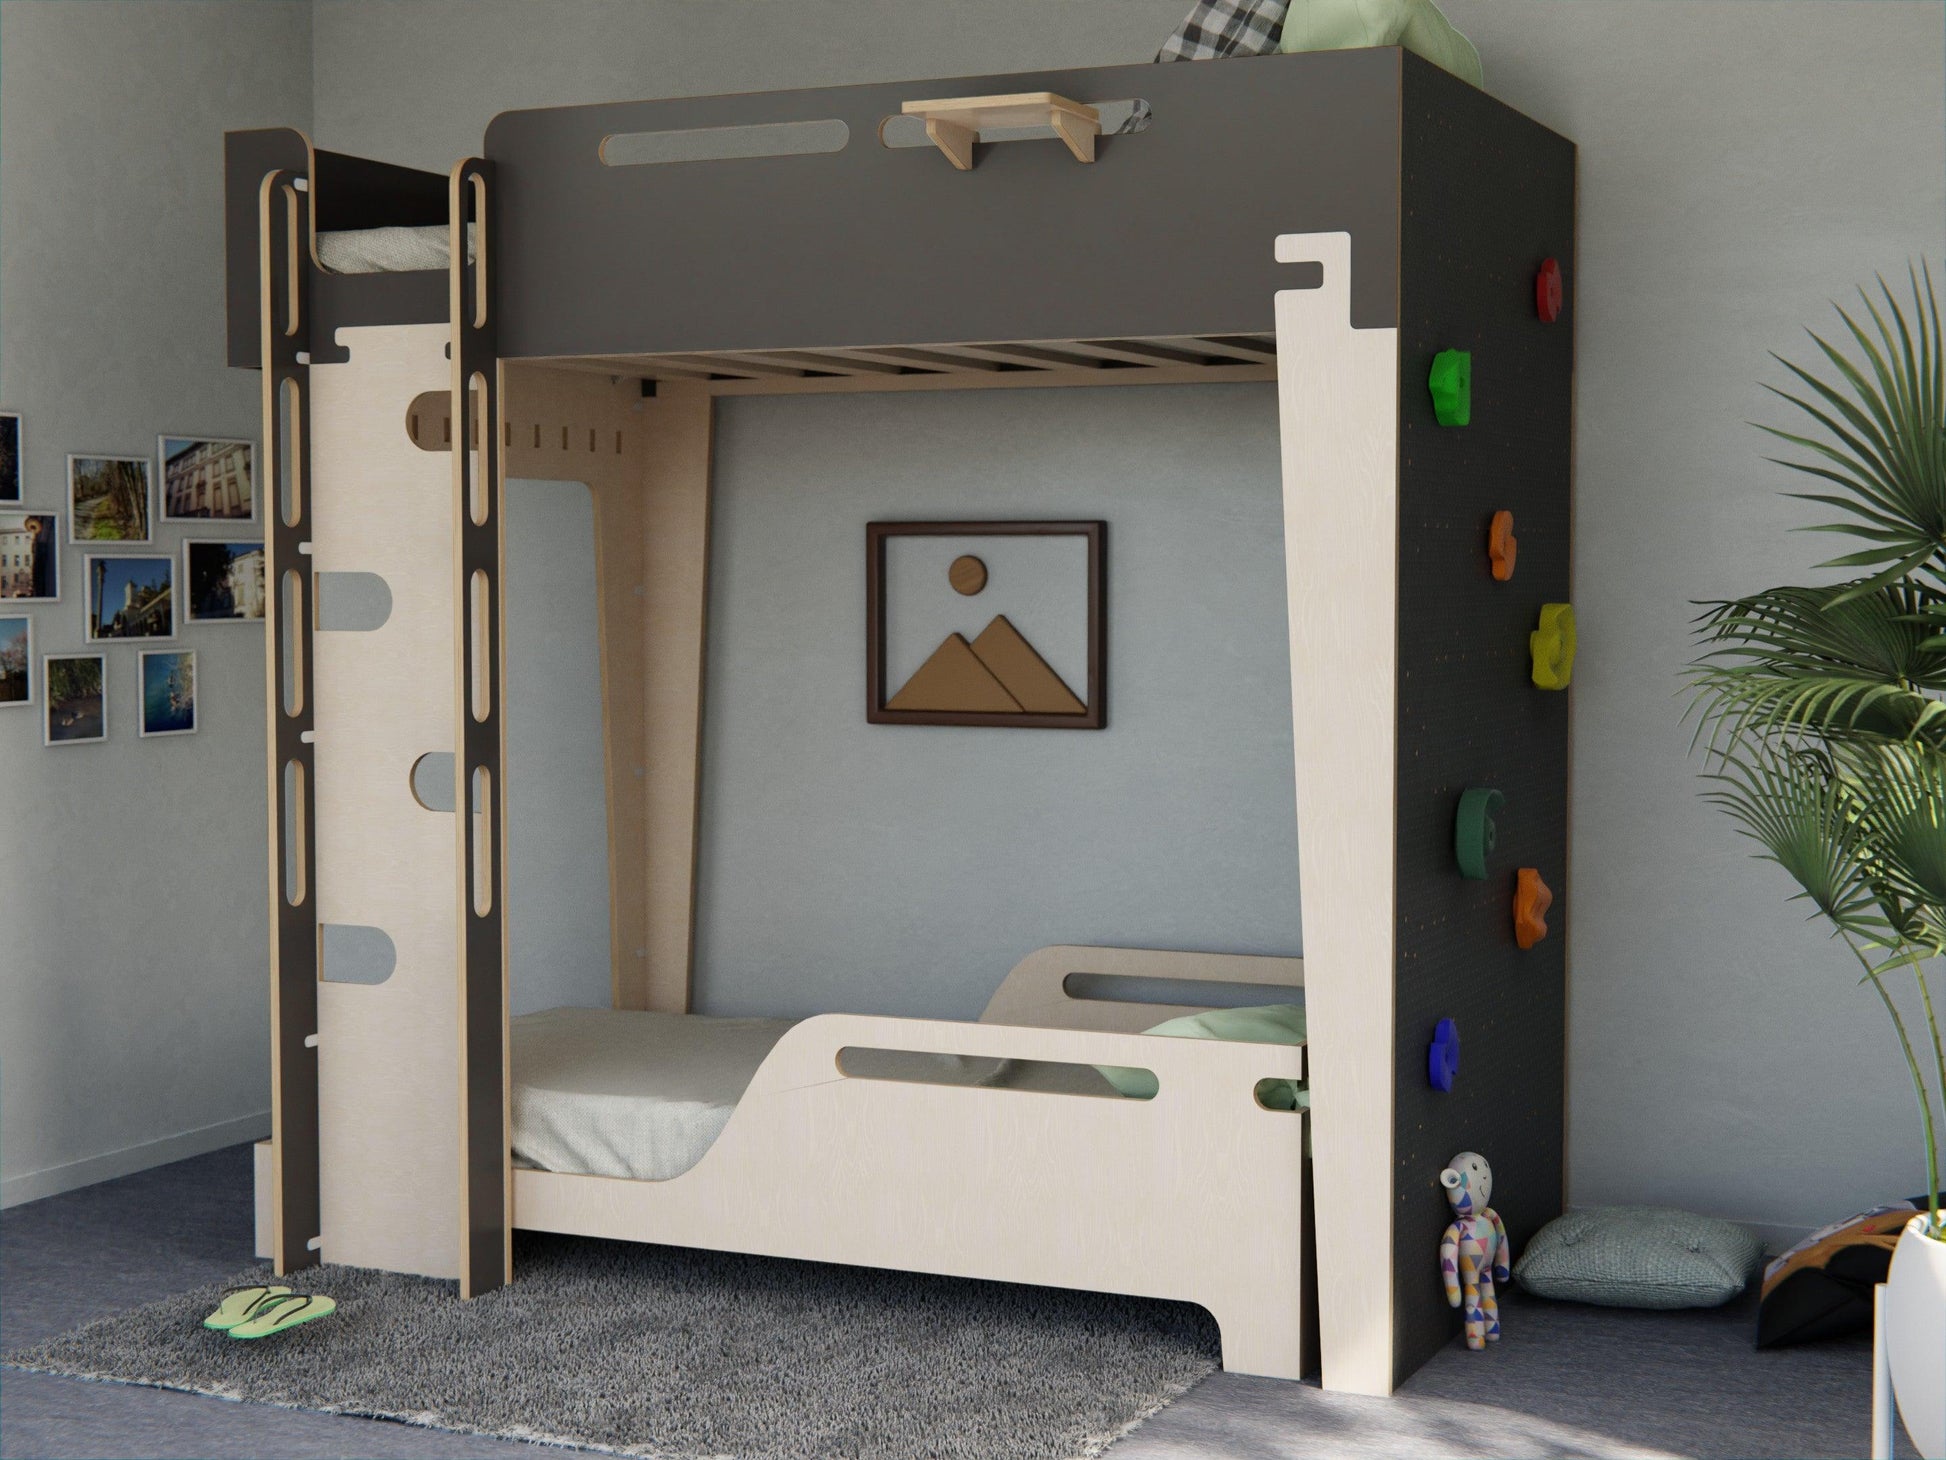 Plywood elevated bed meets excitement with an integrated rock climbing wall. Transform bedtime into playtime.